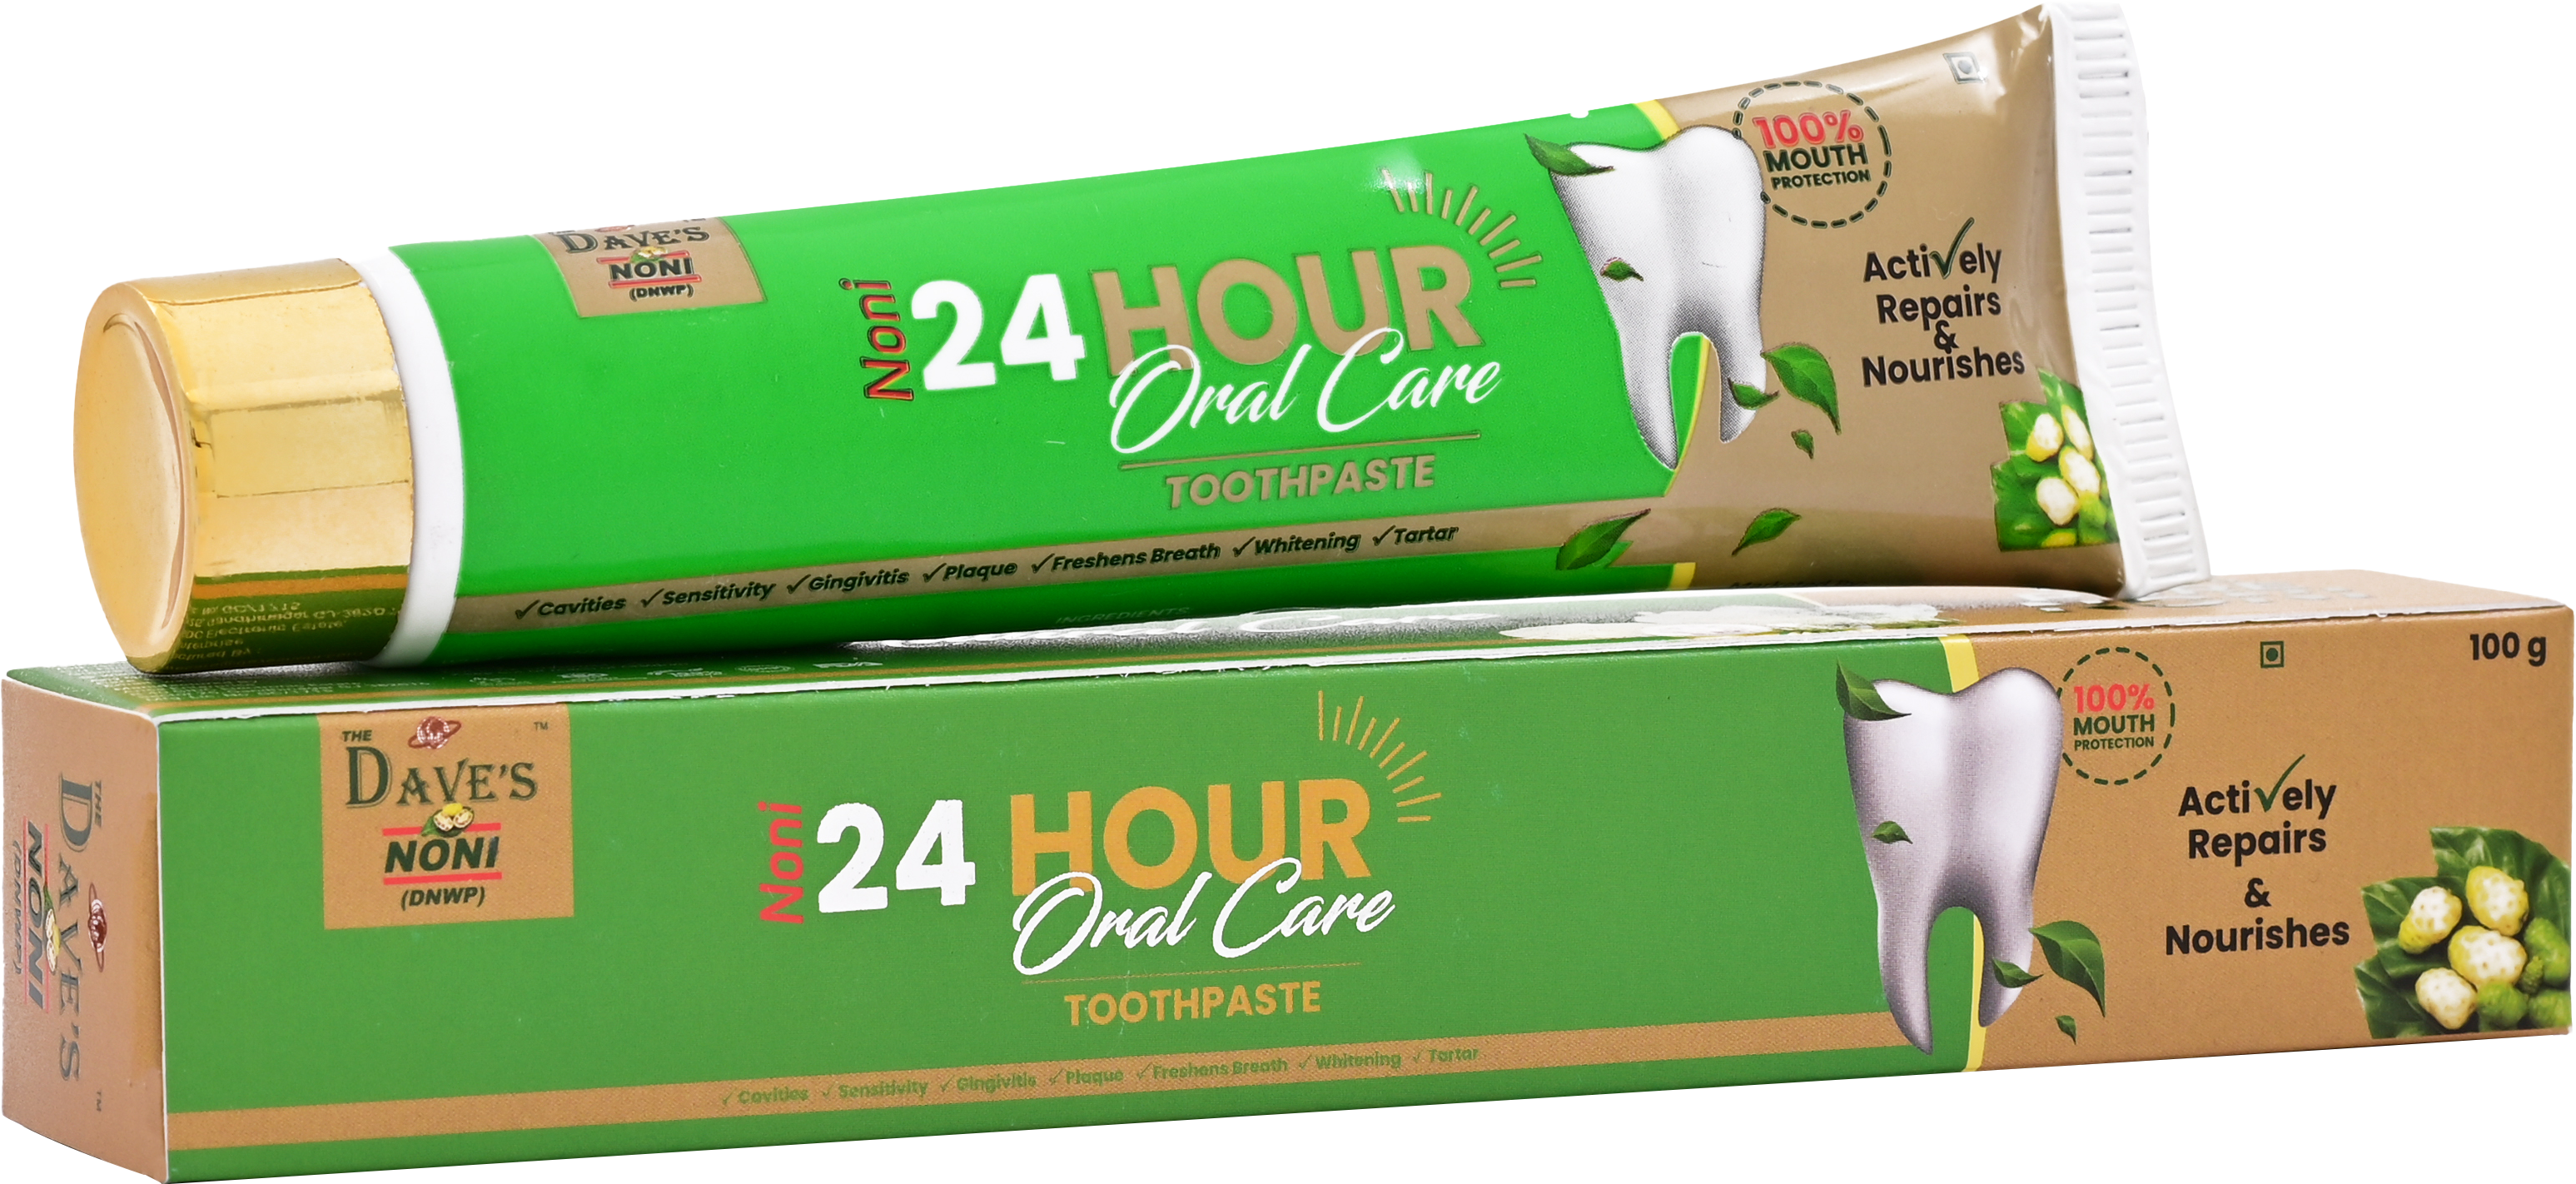 Noni 24 Hour Oral Care Toothpaste Pack Of 1 | Noni Toothpaste